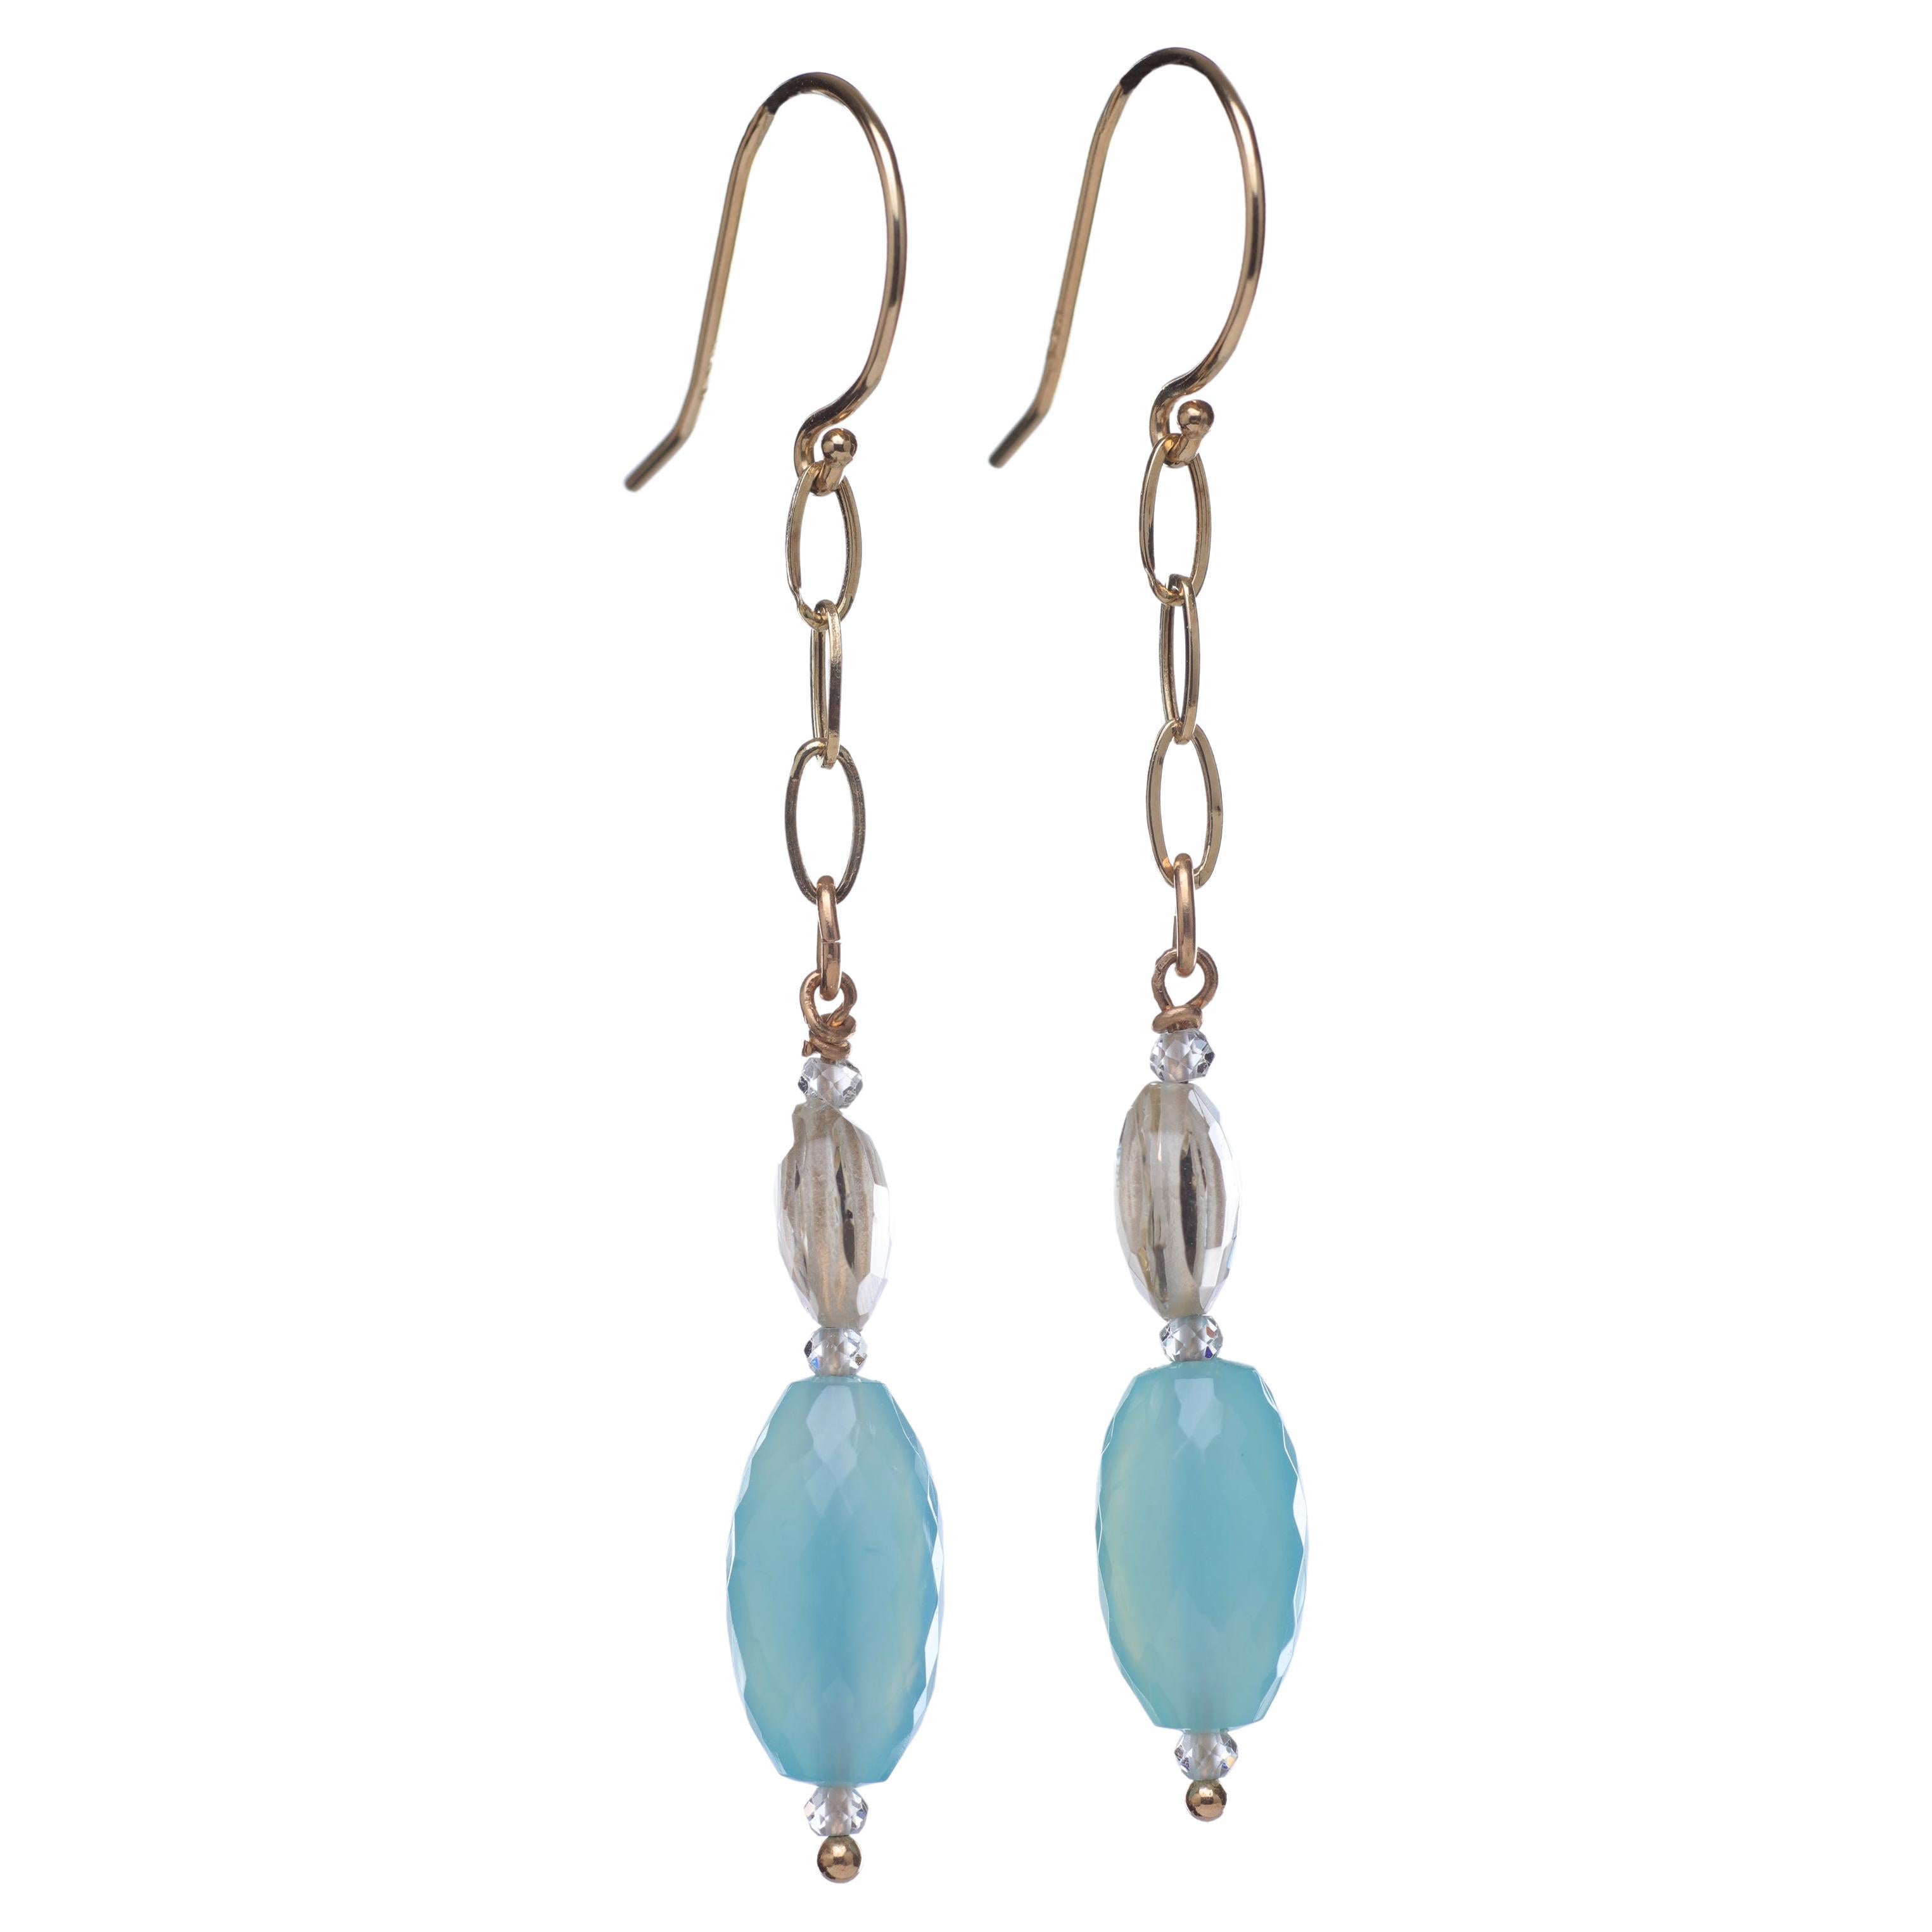 Blue Chalcedony, Scapolite, Topaz, and Gold Earrings